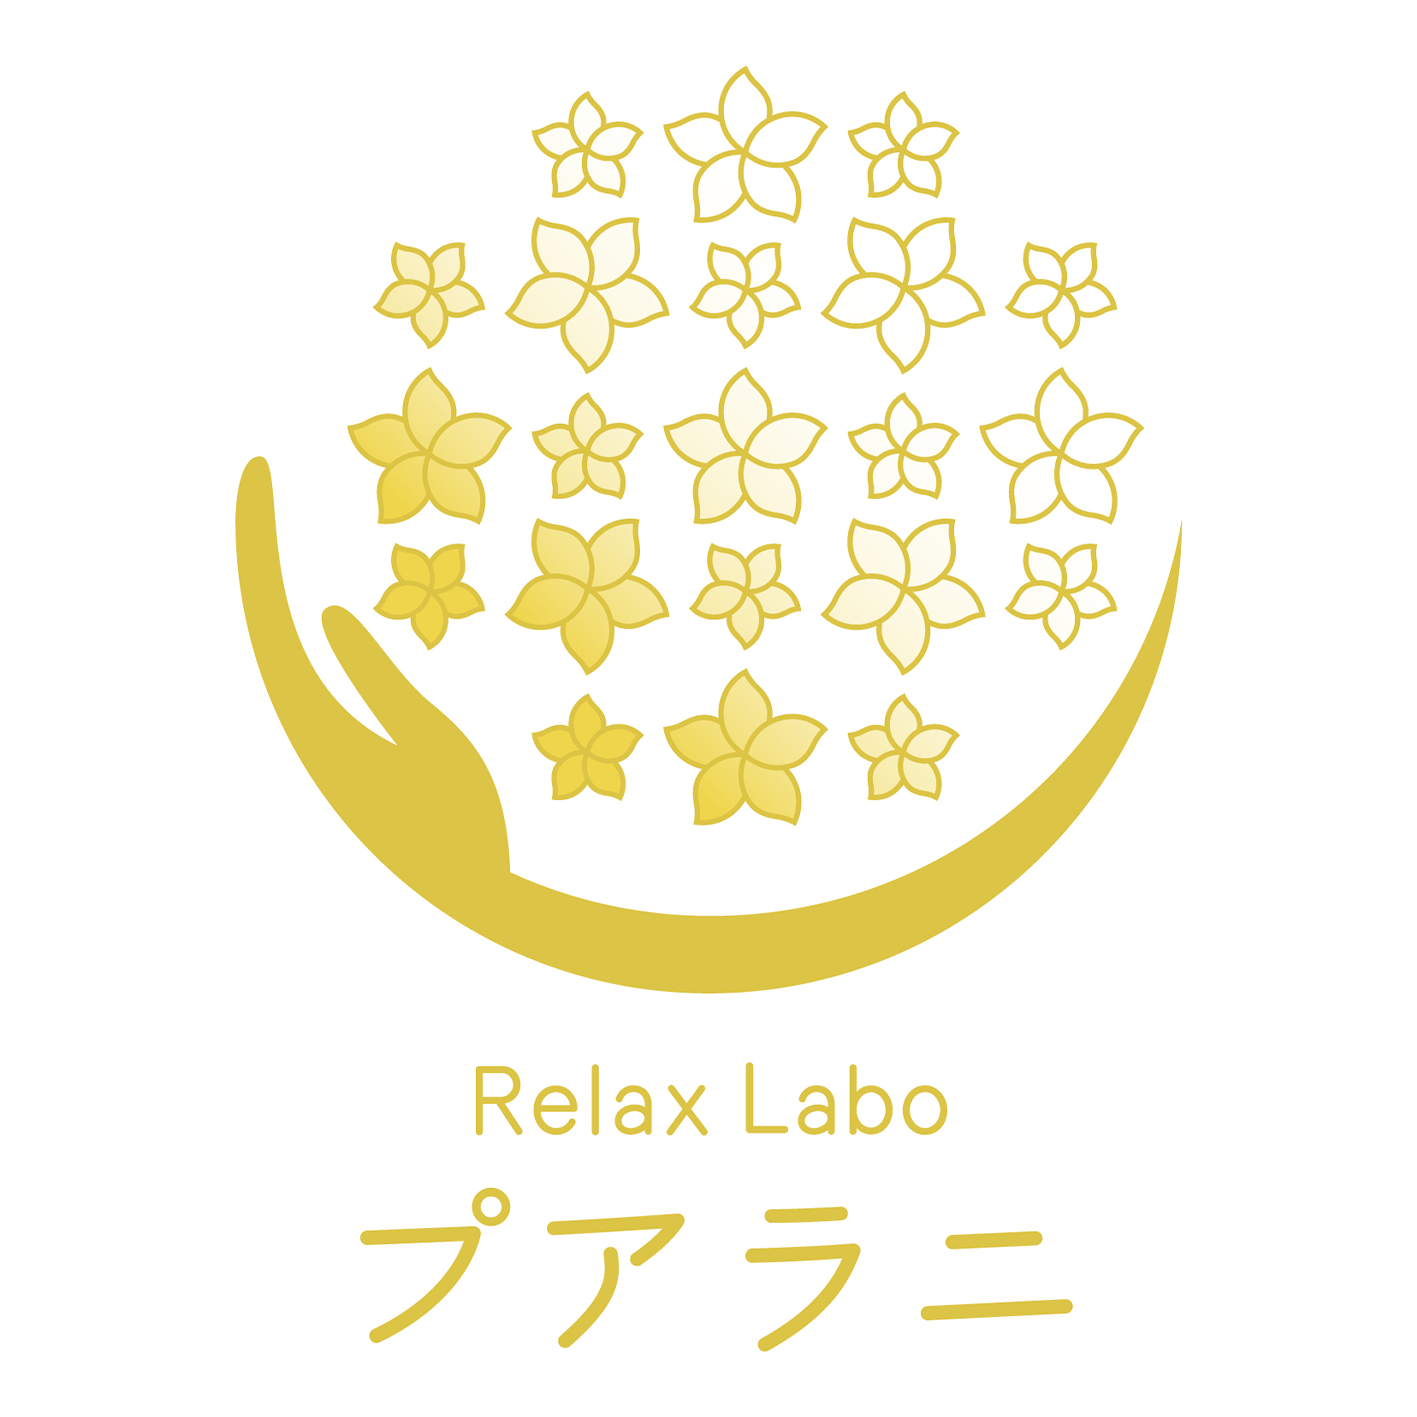 Relax Labo